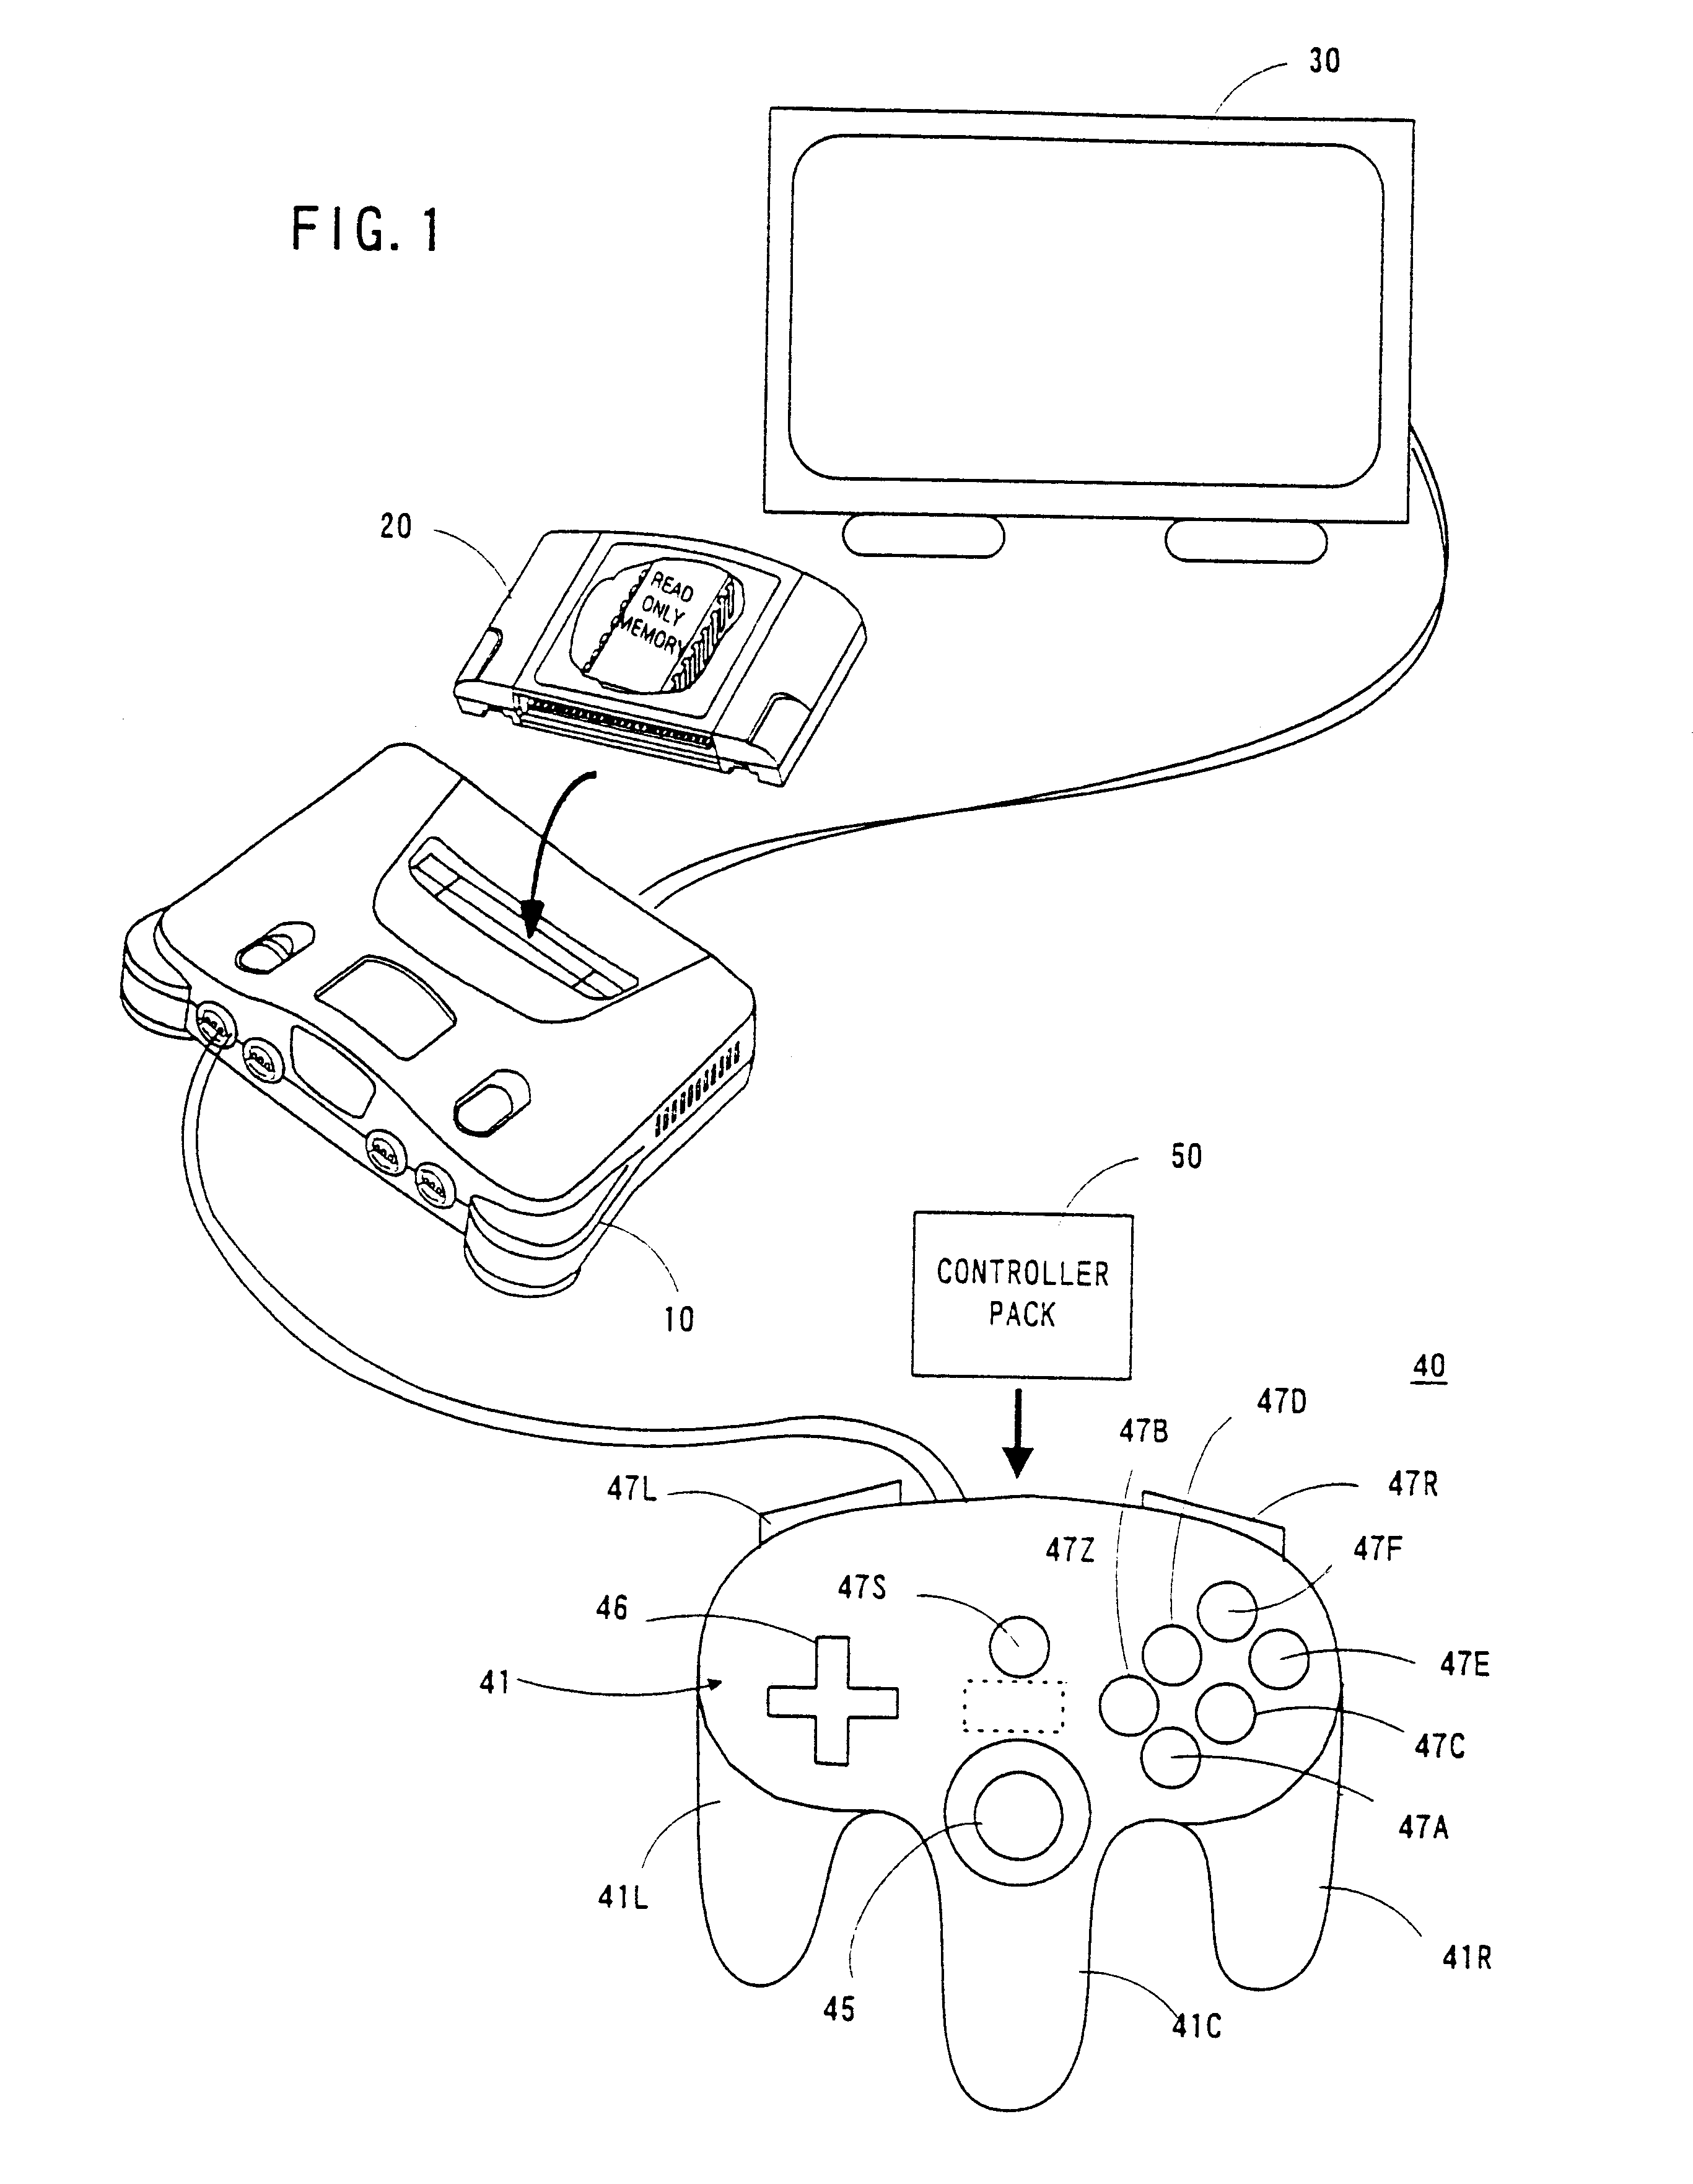 Video game apparatus and method with enhanced virtual camera control